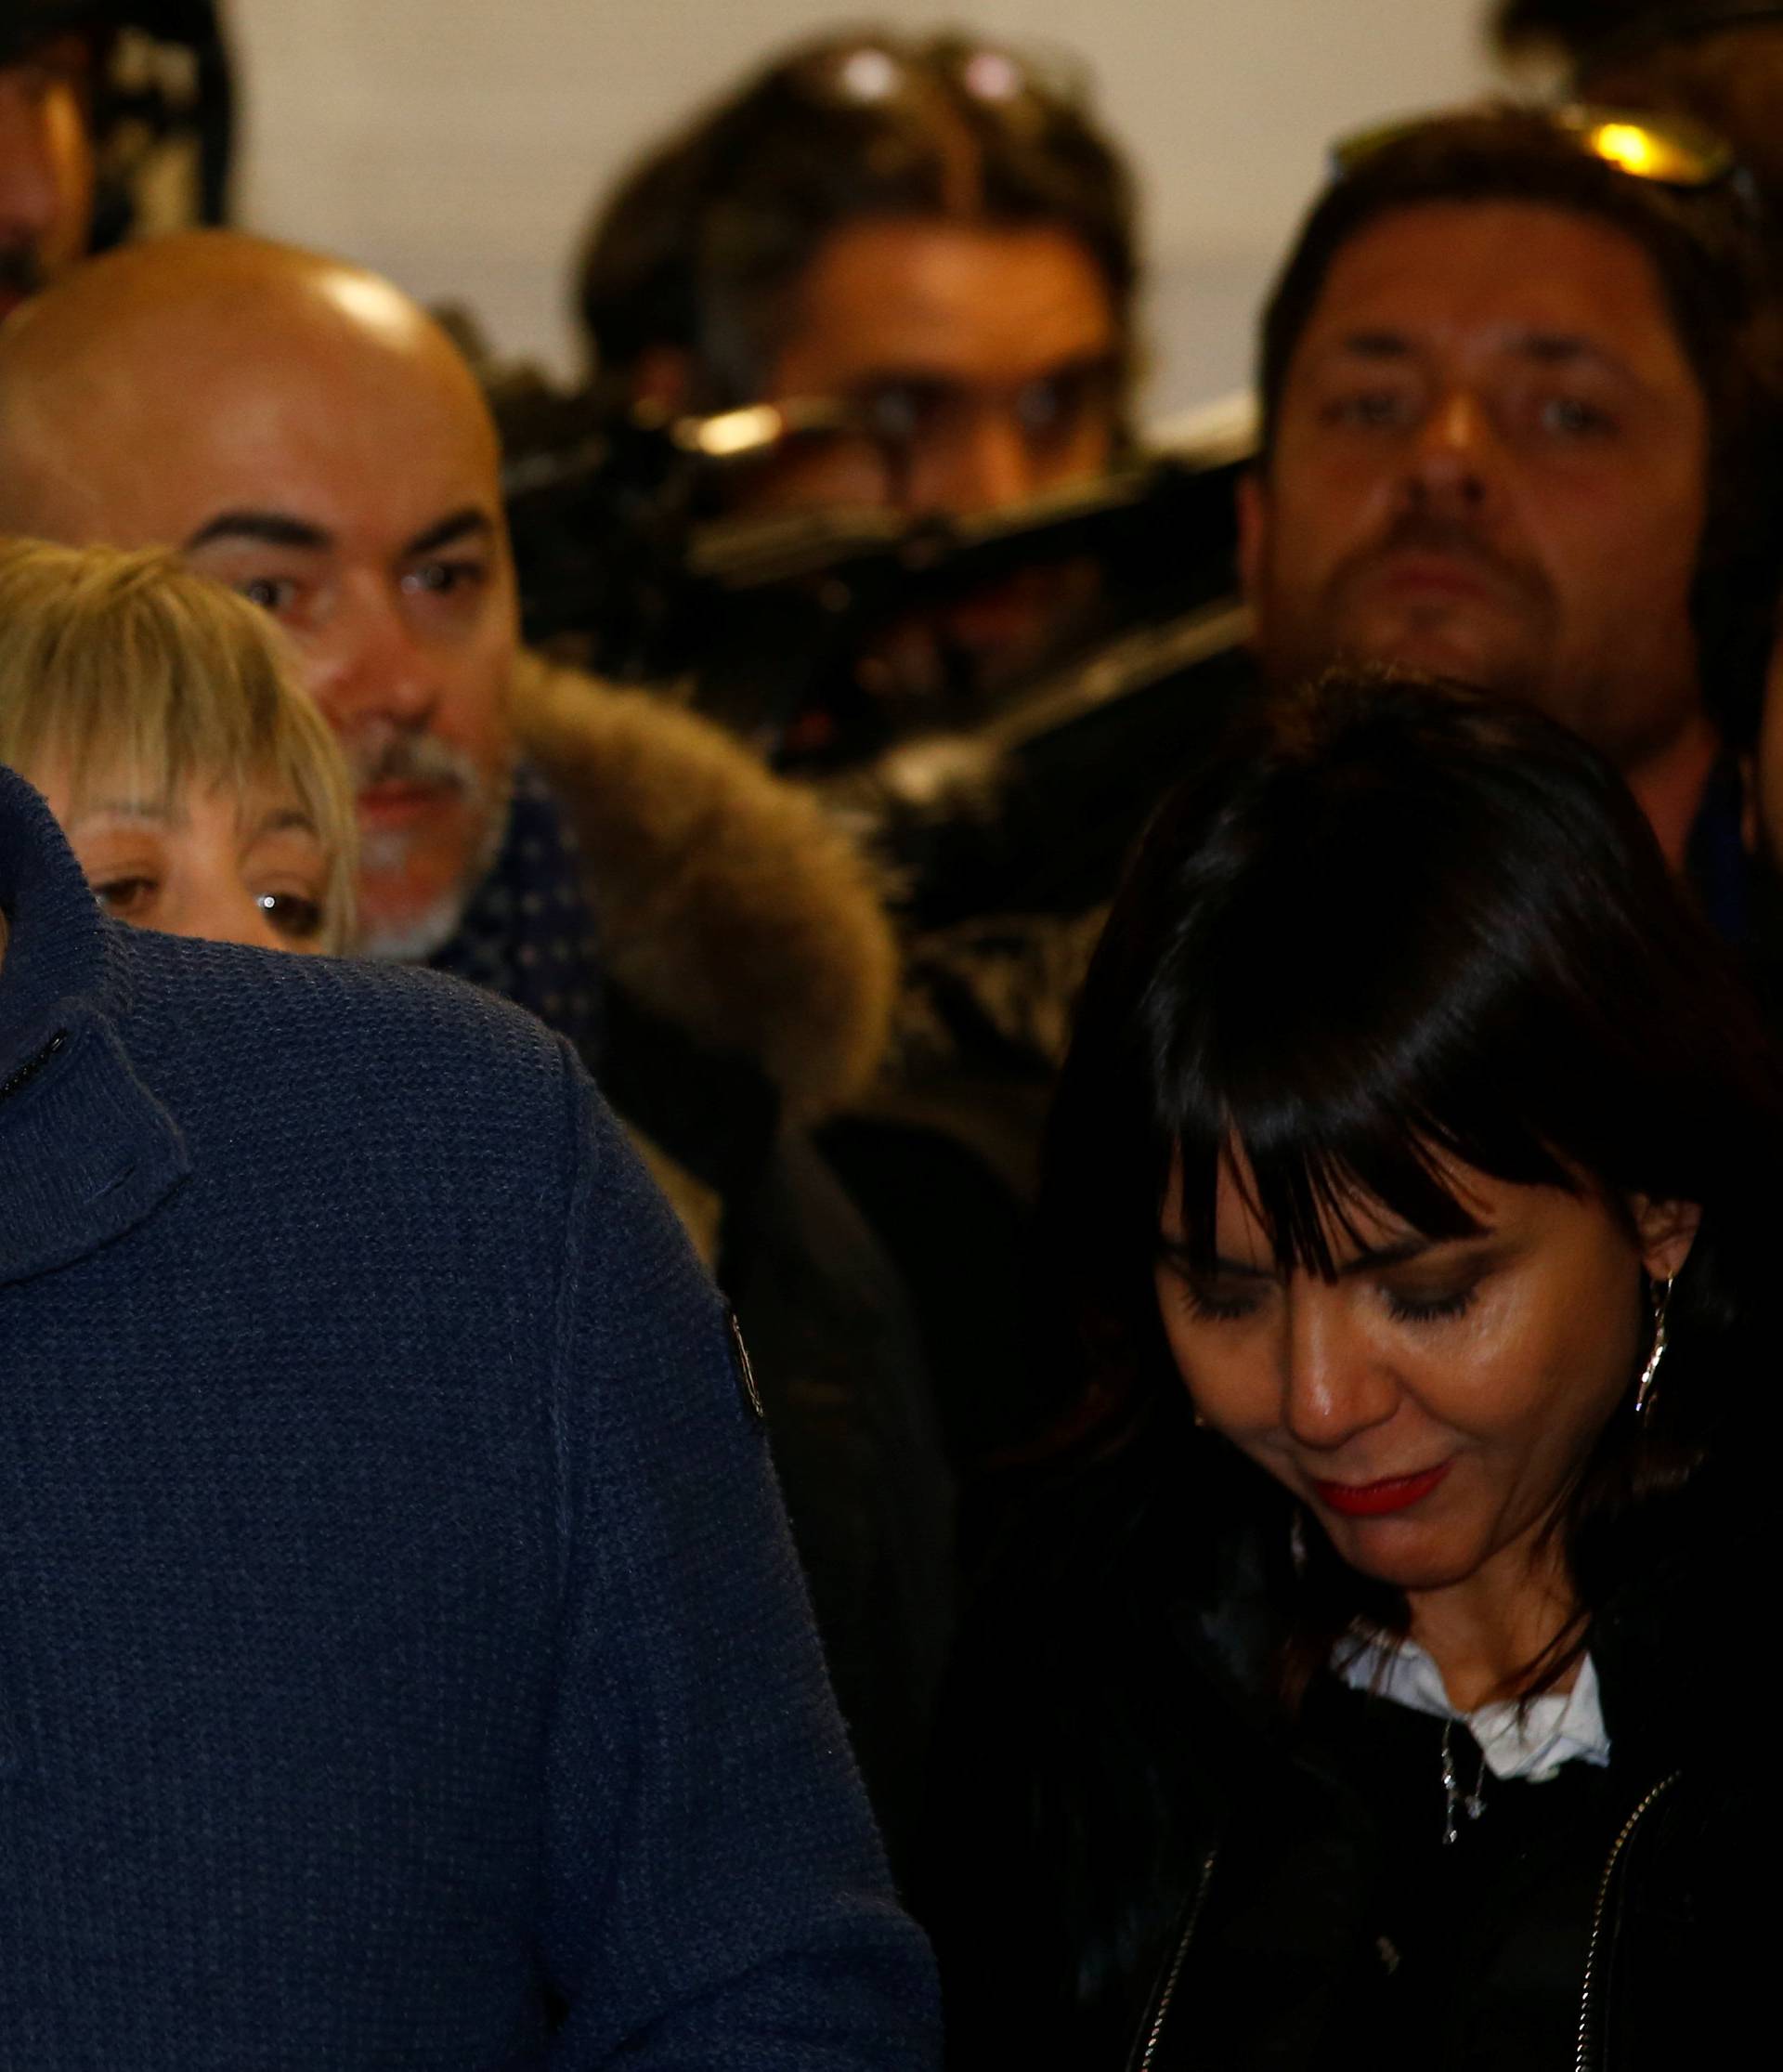 Northern League party leader Matteo Salvini arrives to casts his vote at a polling station in Milan